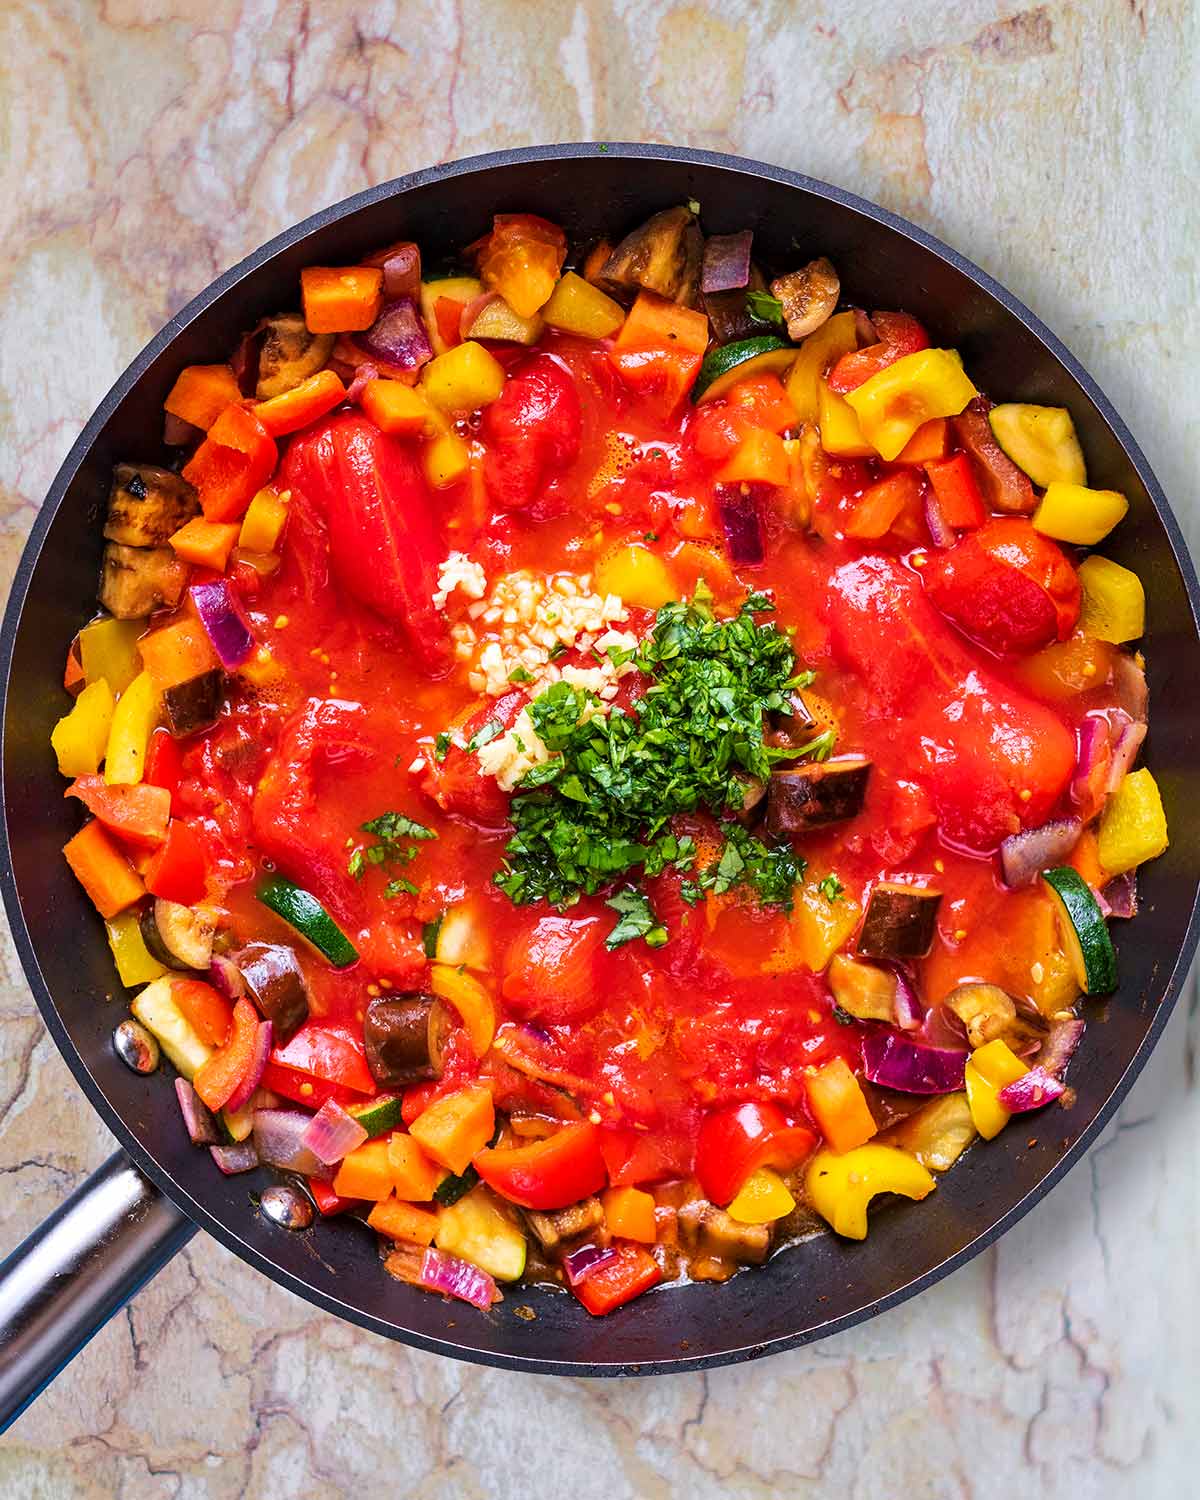 Chopped vegetables, plum tomatoes, chopped herbs and crushed garlic all cooking in a frying pan.